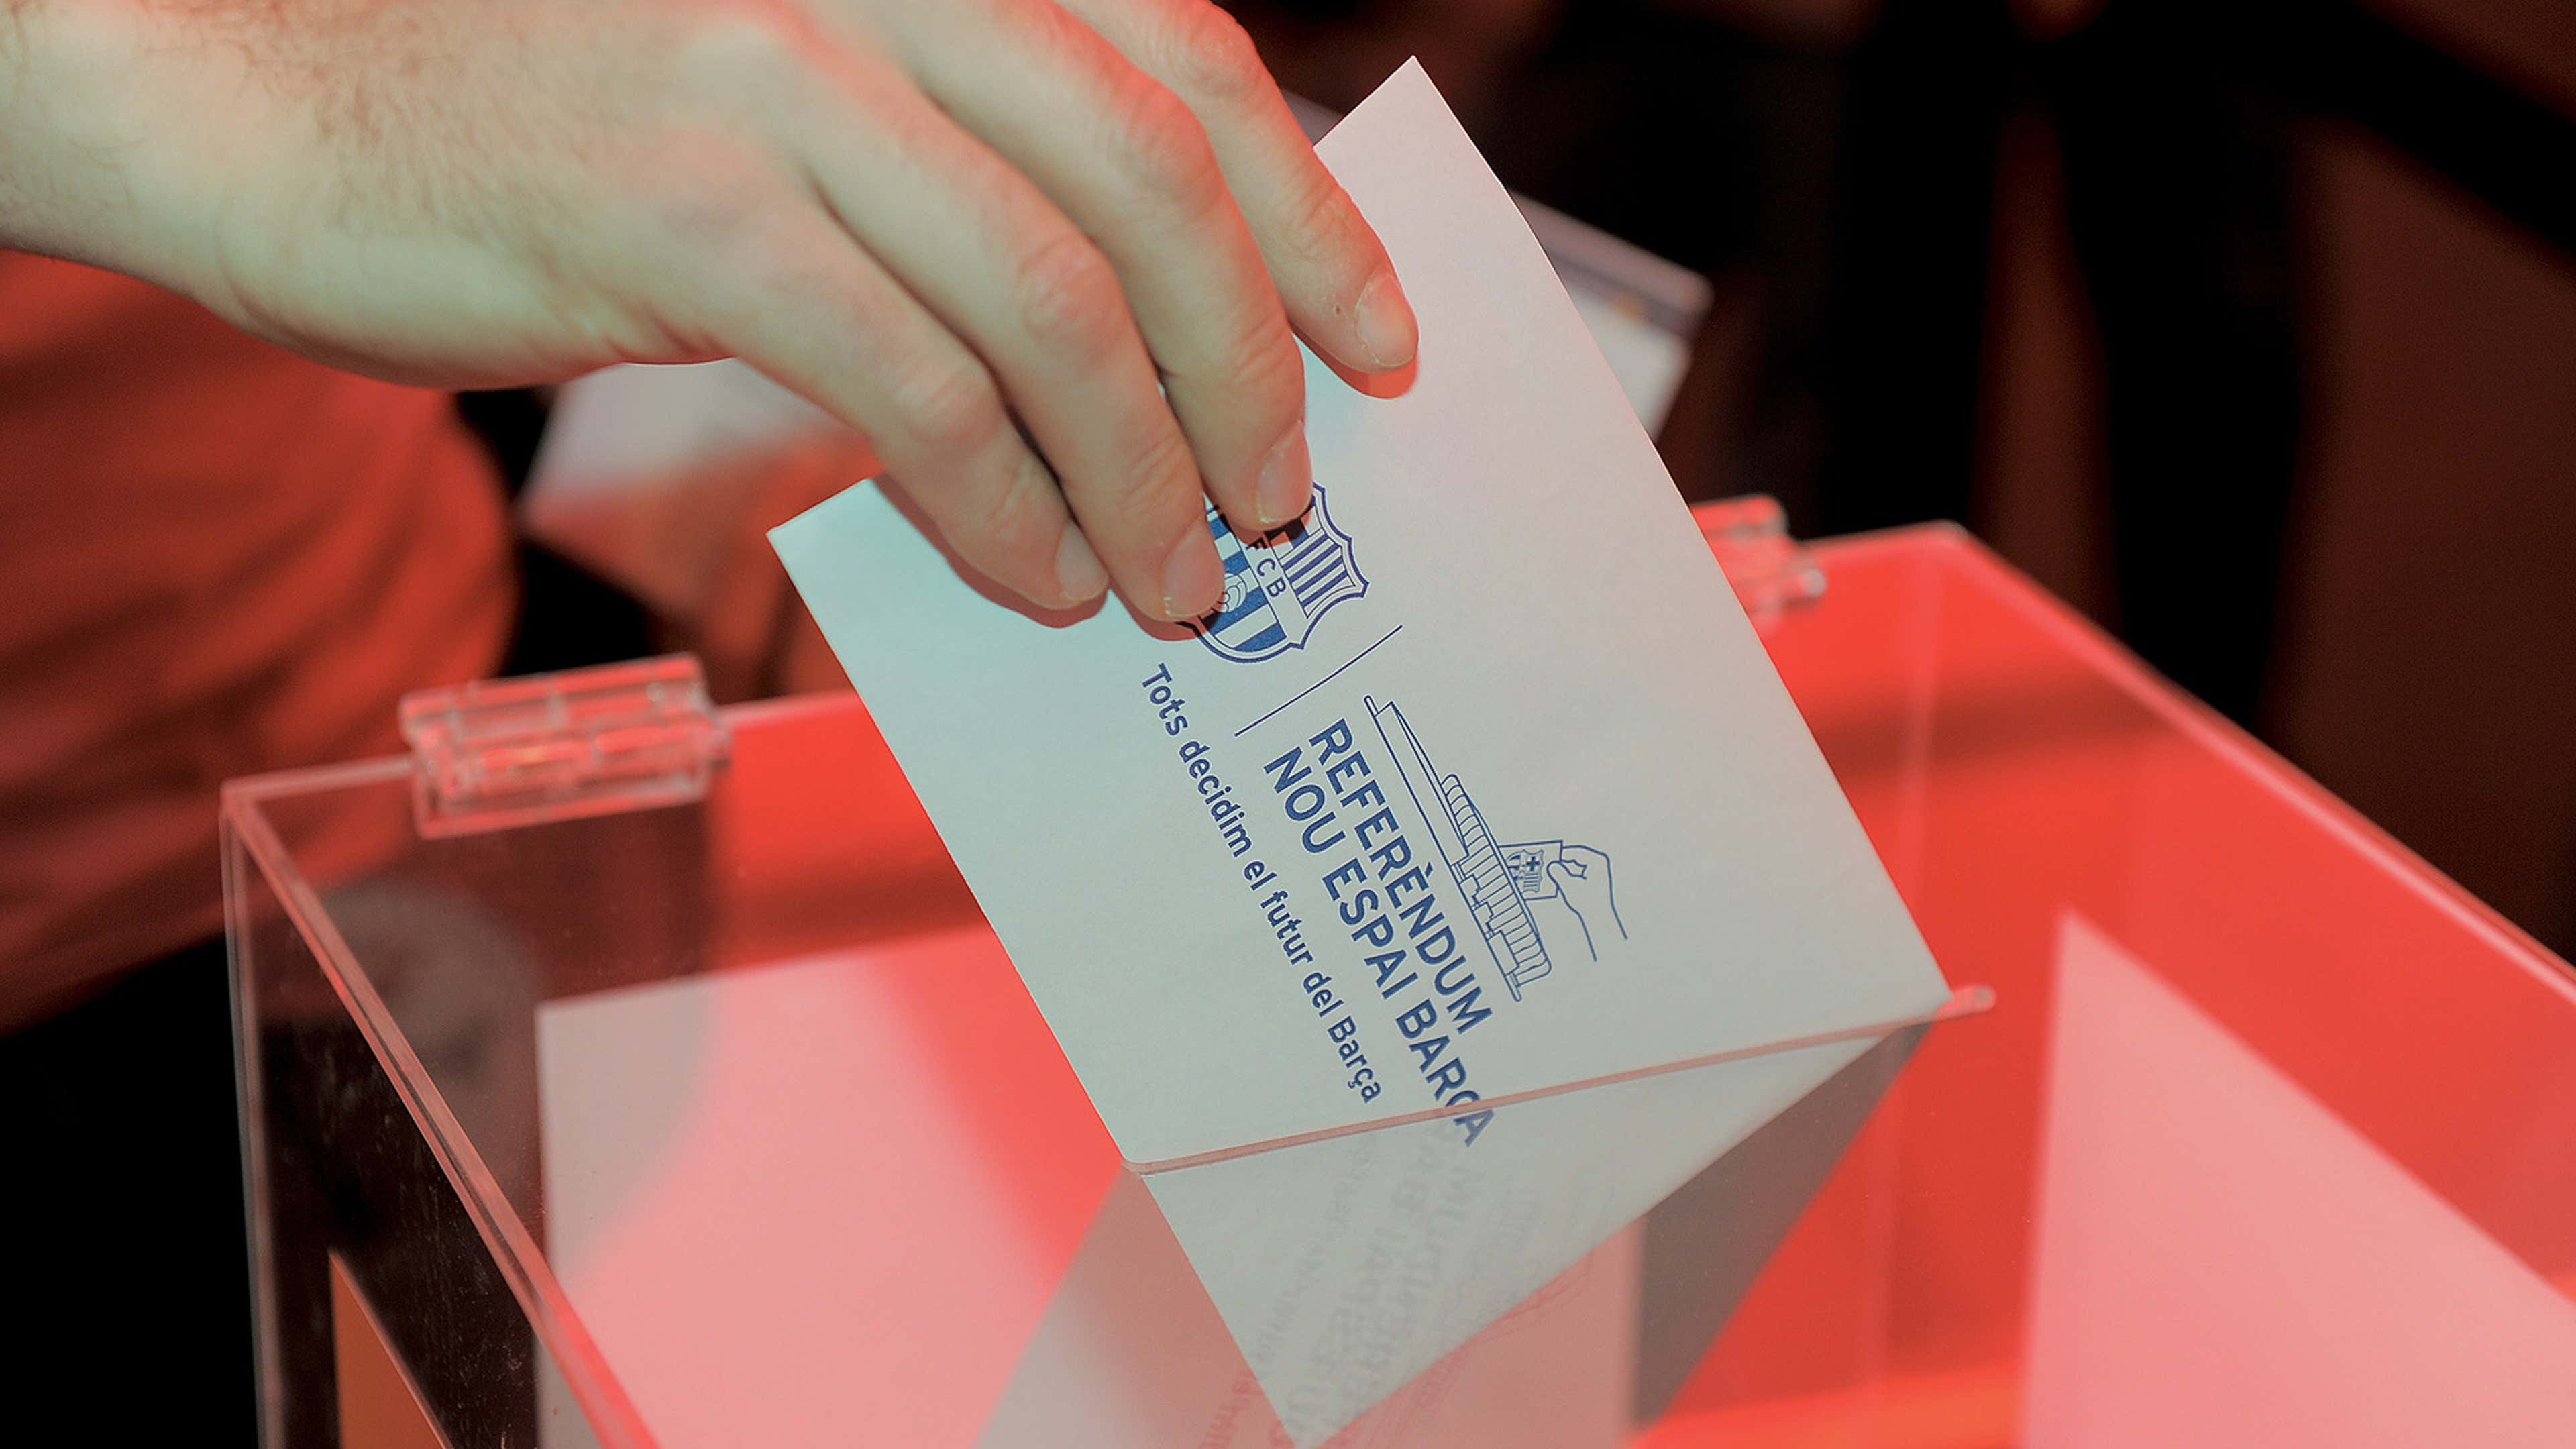 Barcelona presidential elections 2014